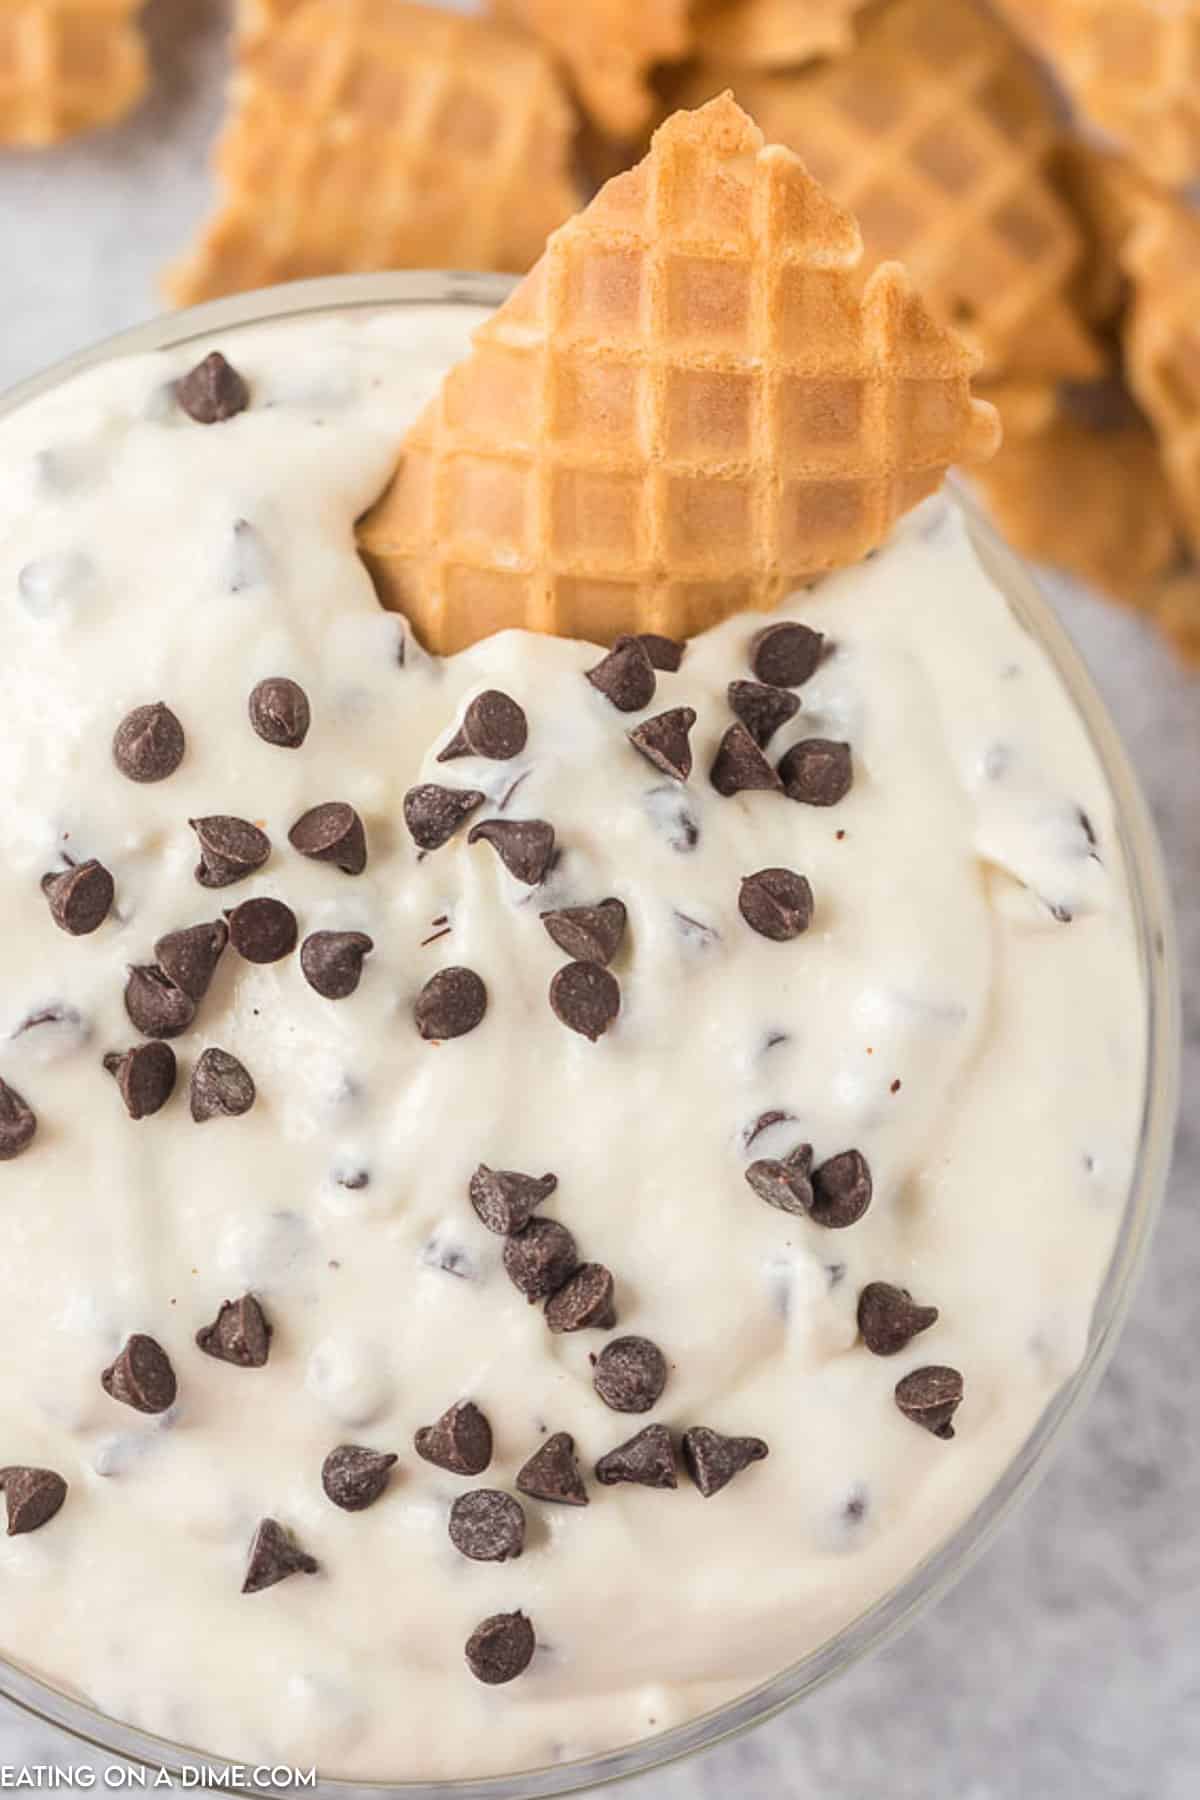 Cannoli Dip in a bowl topped with chocolate chips with a piece of cone in the dip